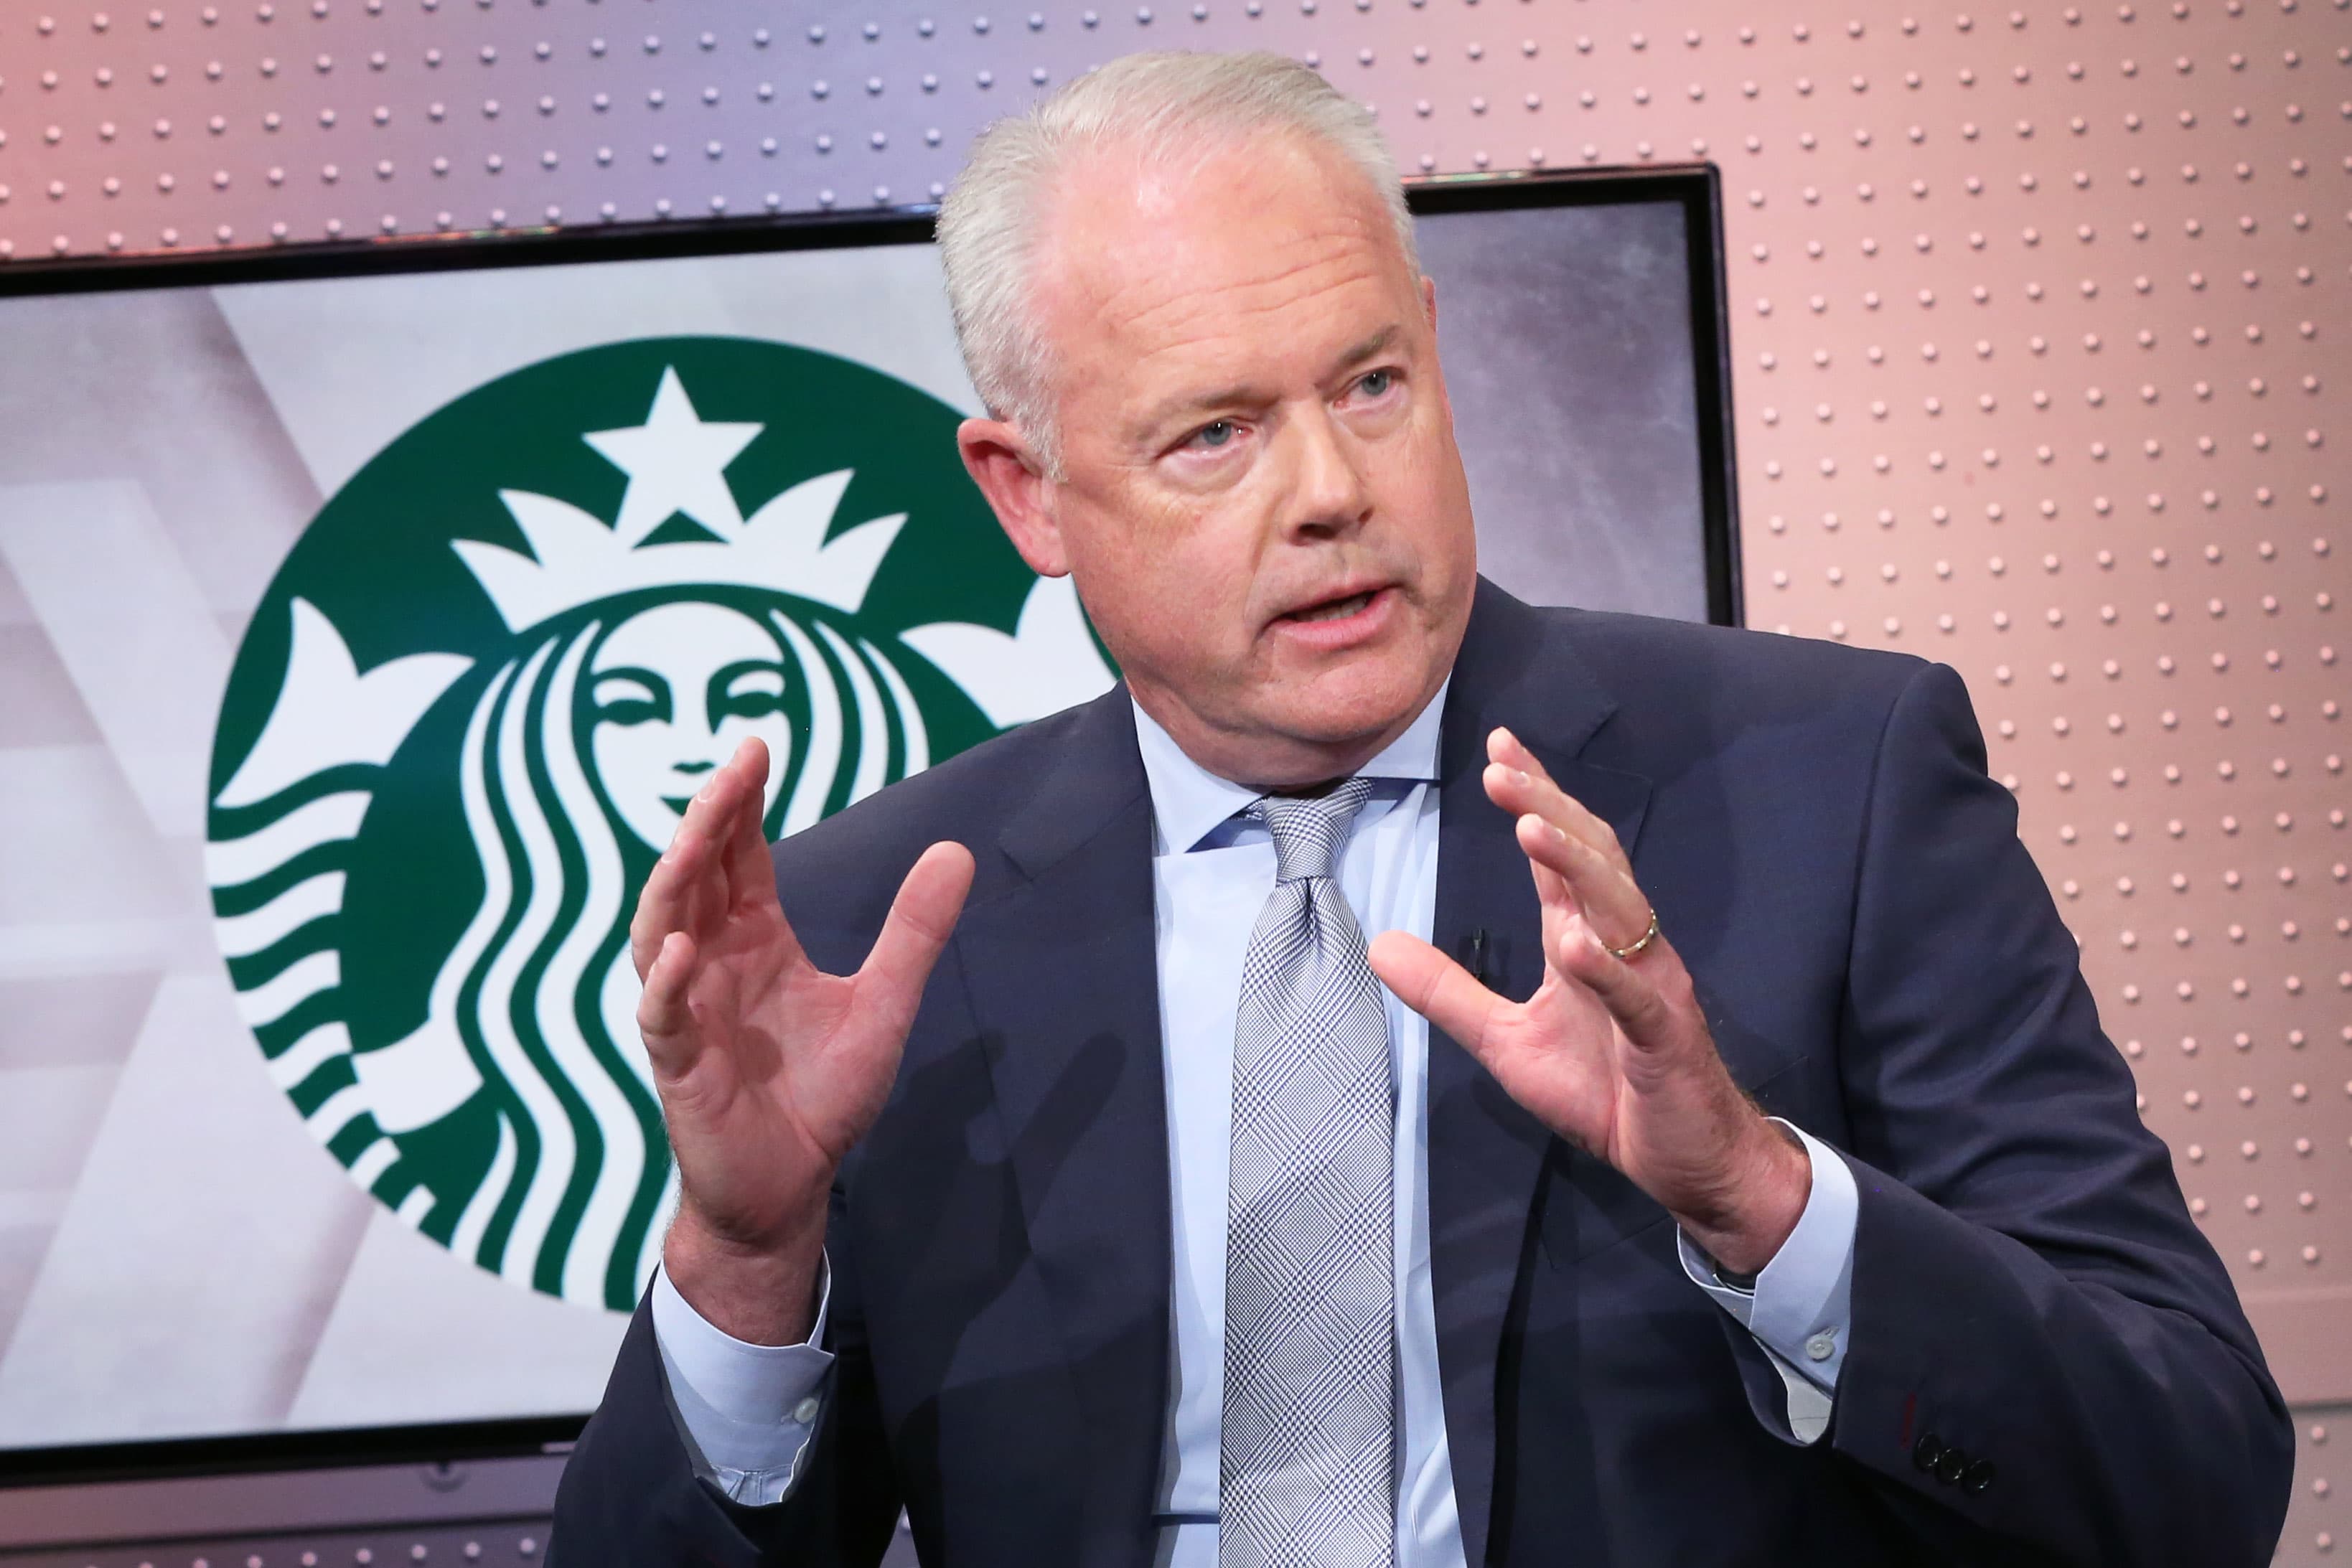 Starbucks CEO says business is rebounding in markets where vaccinations are up